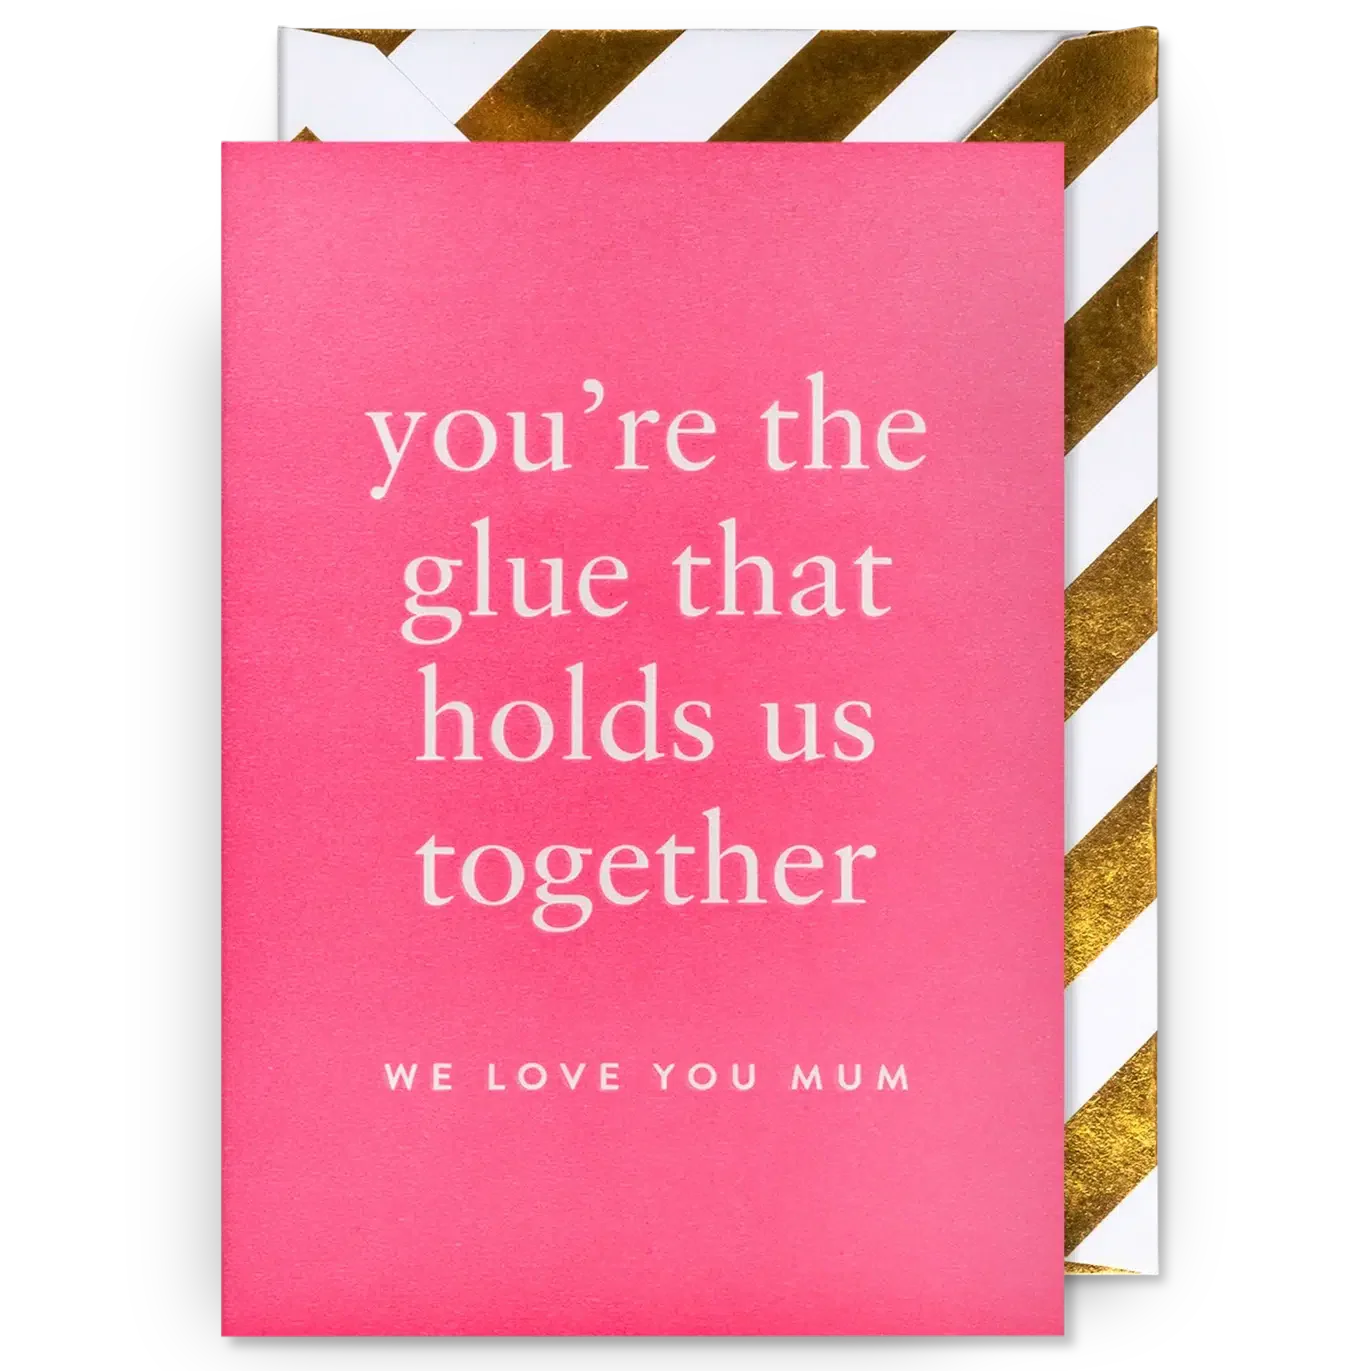 Fabulous Gifts Postco We Love You Mum Card by Weirs of Baggot Street